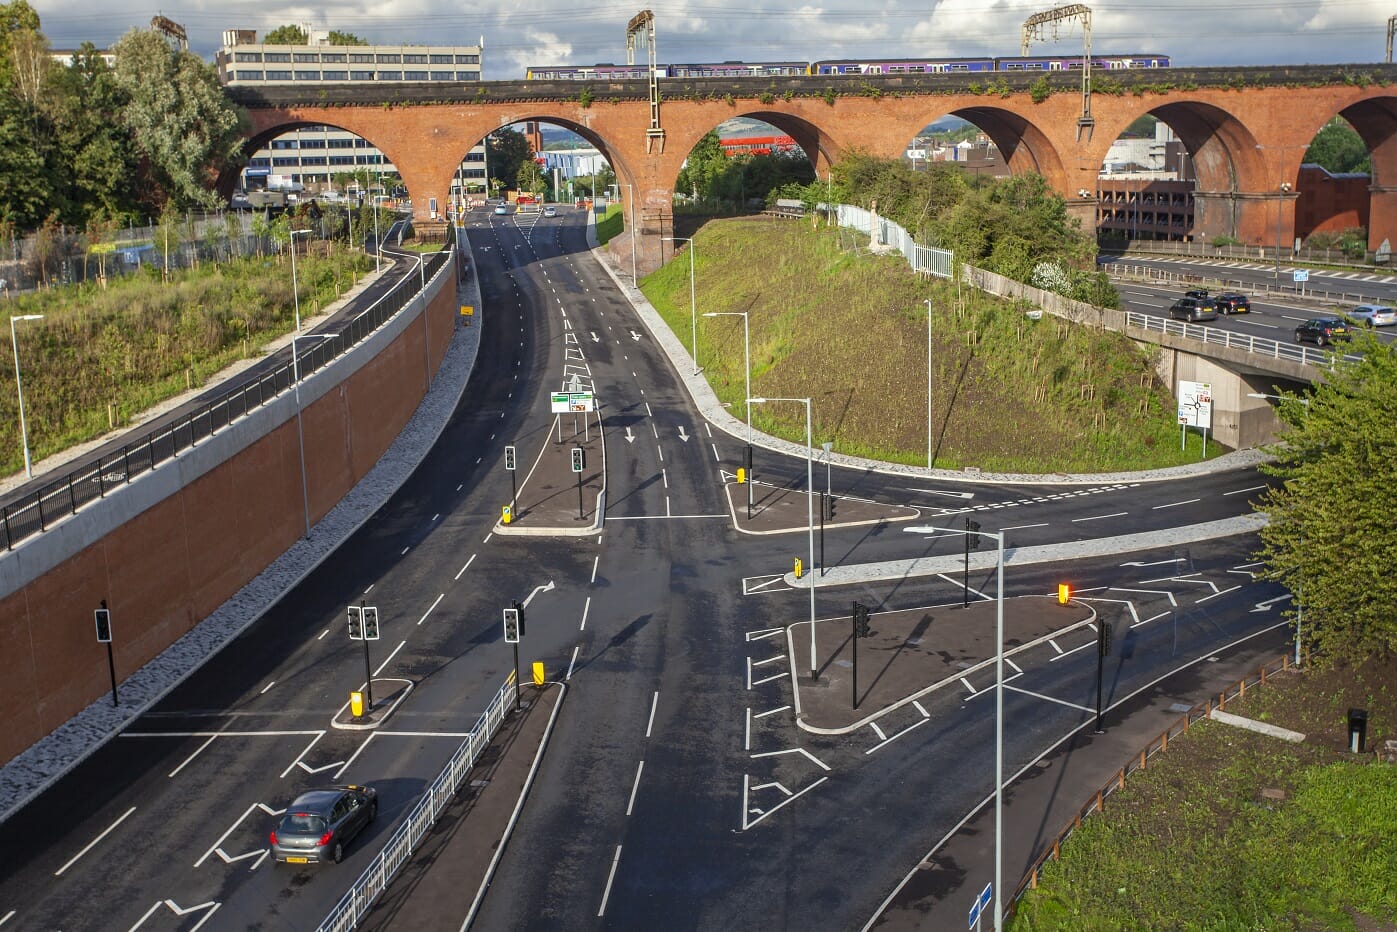 GRAHAM completes major new £8m link road for Stockport Council  @GRAHAM